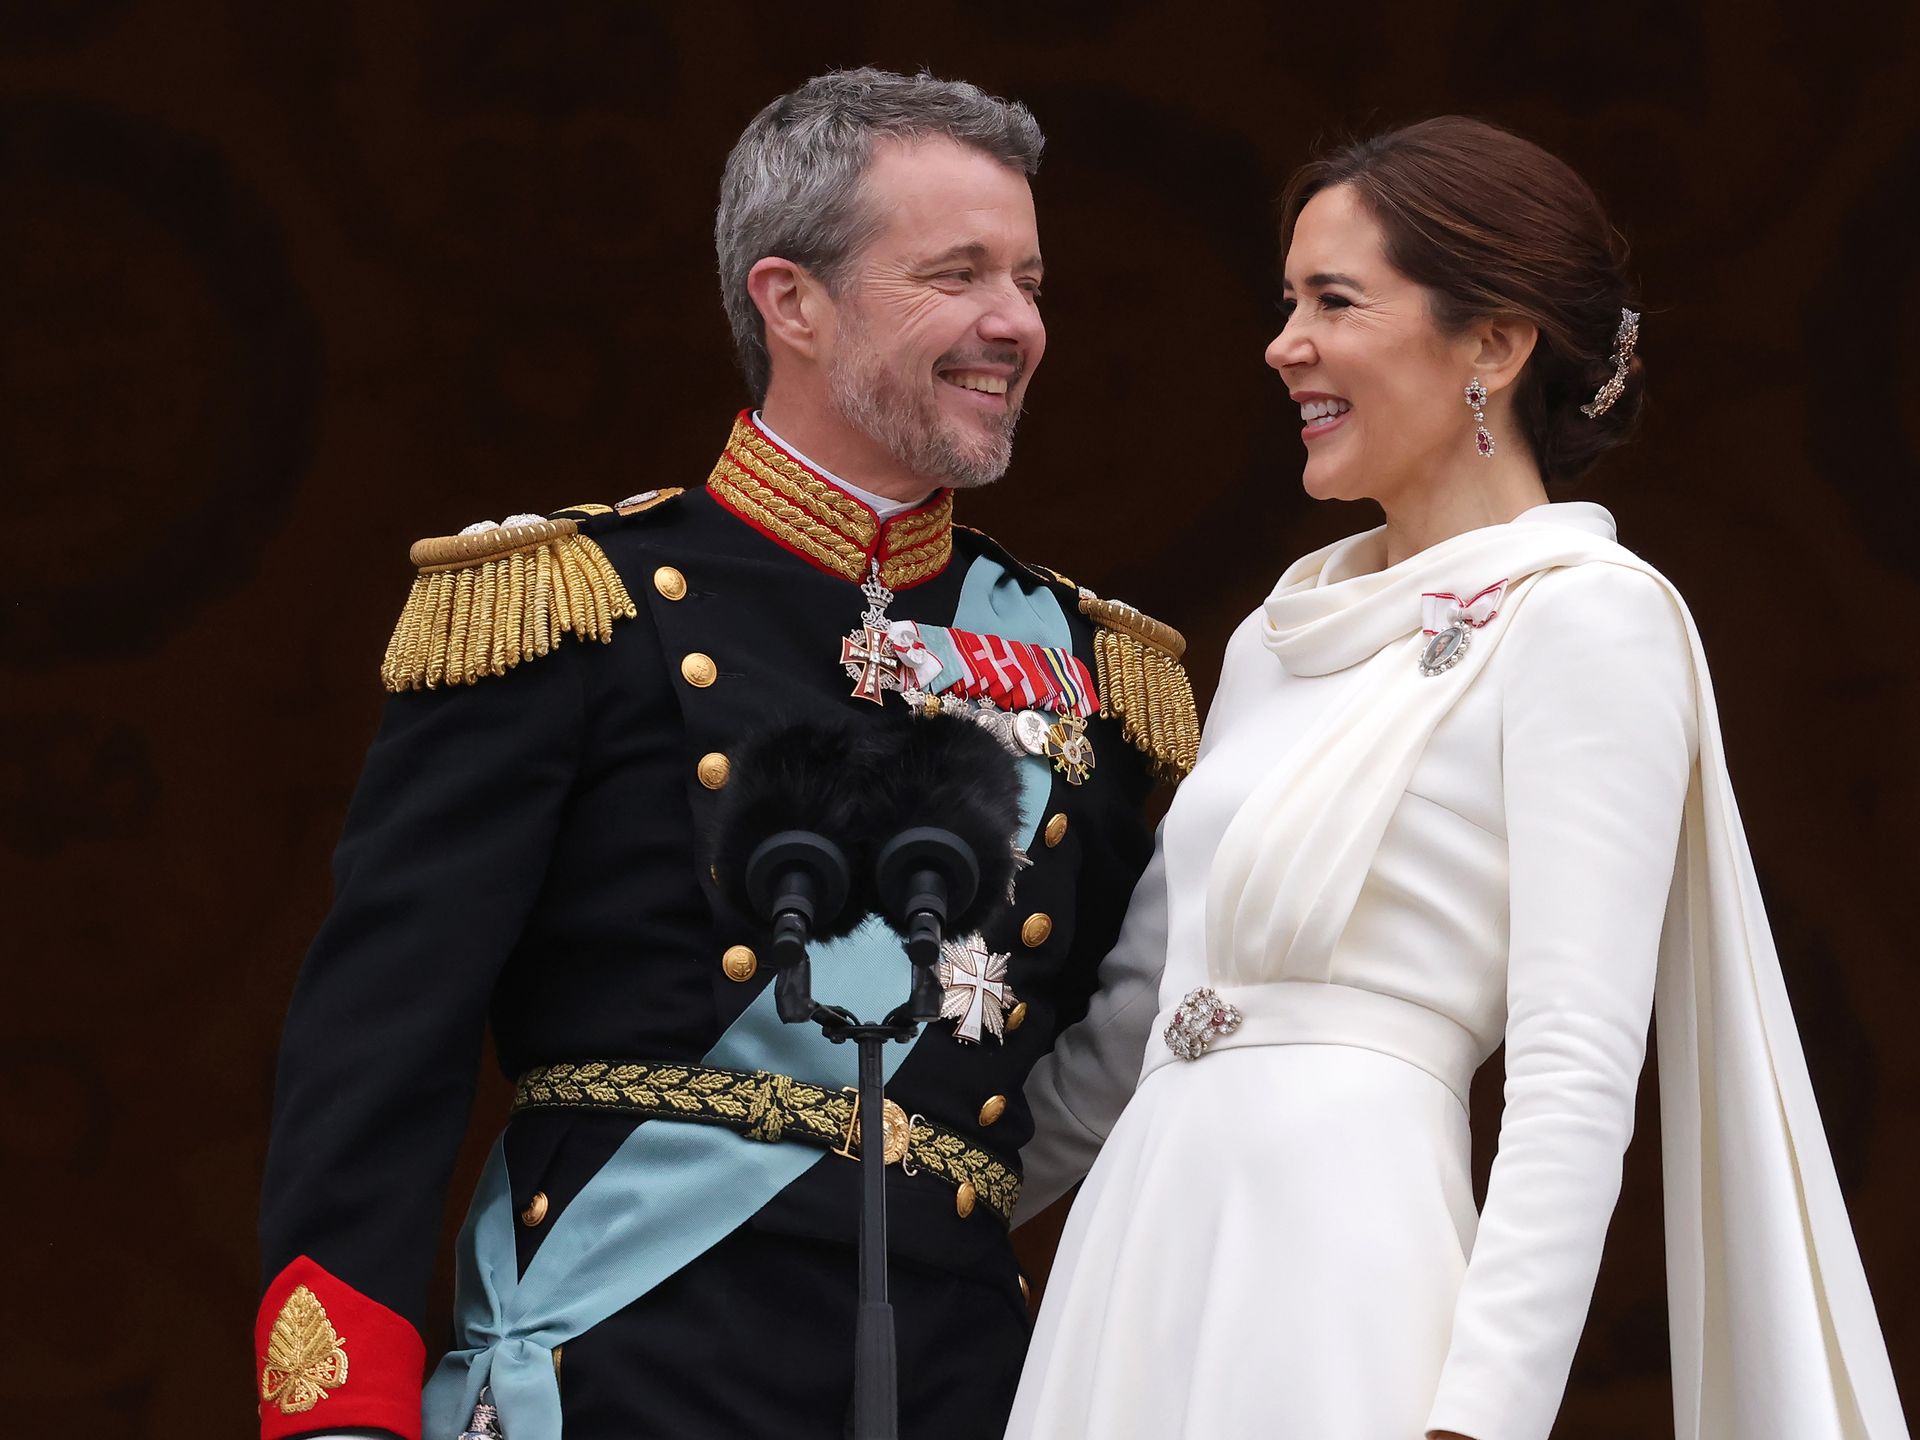 Crown Princess Mary of Denmark is every inch a Queen in angelic